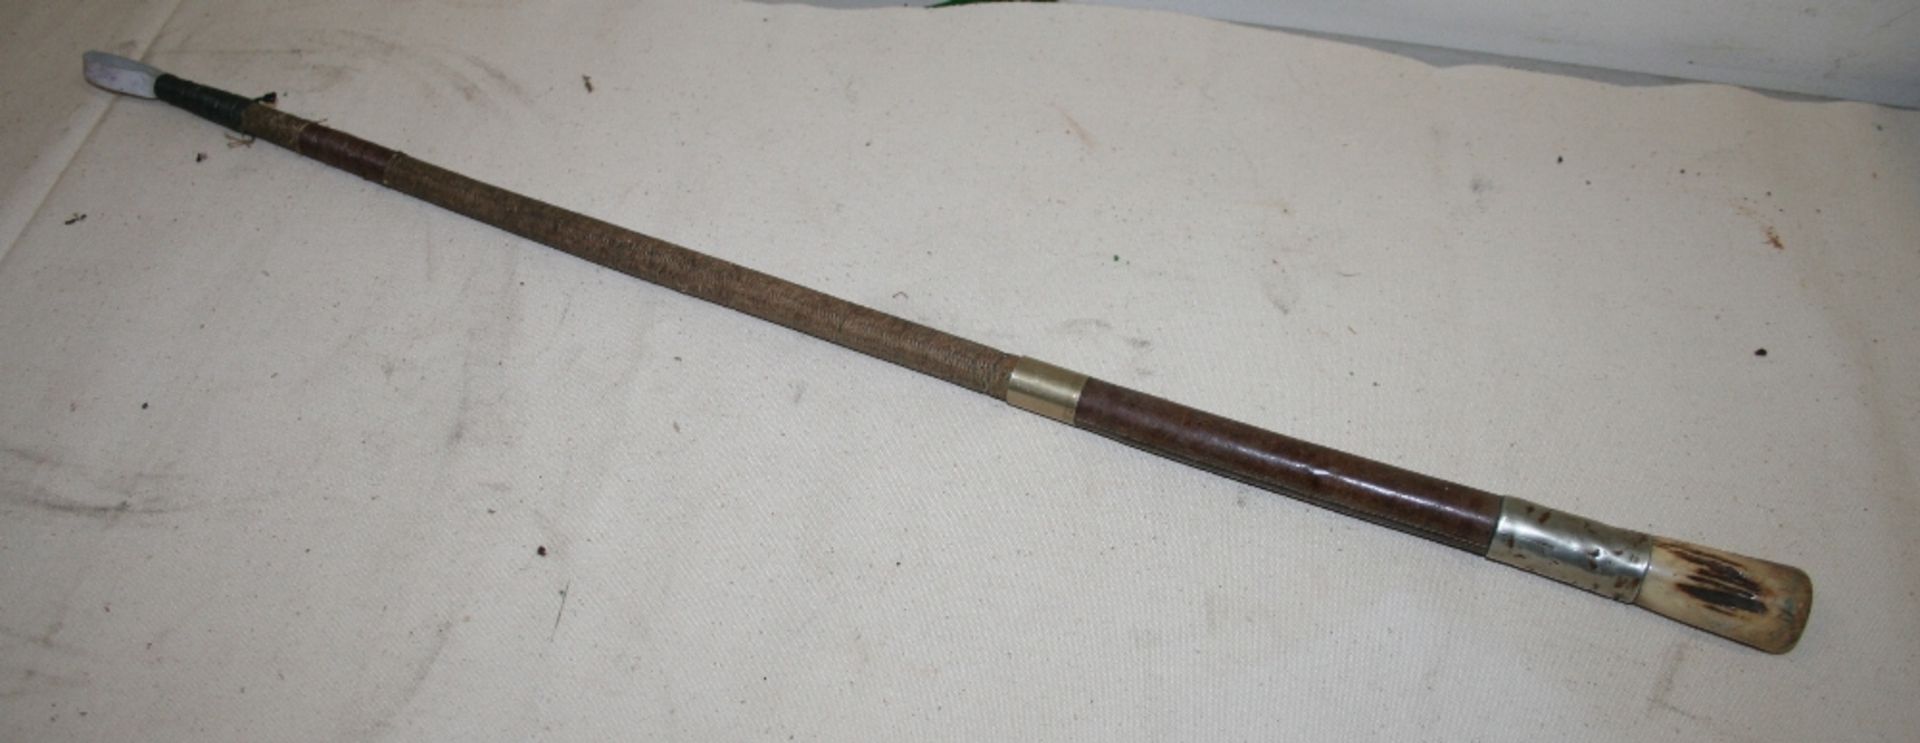 Dealer's whip with a bone handle